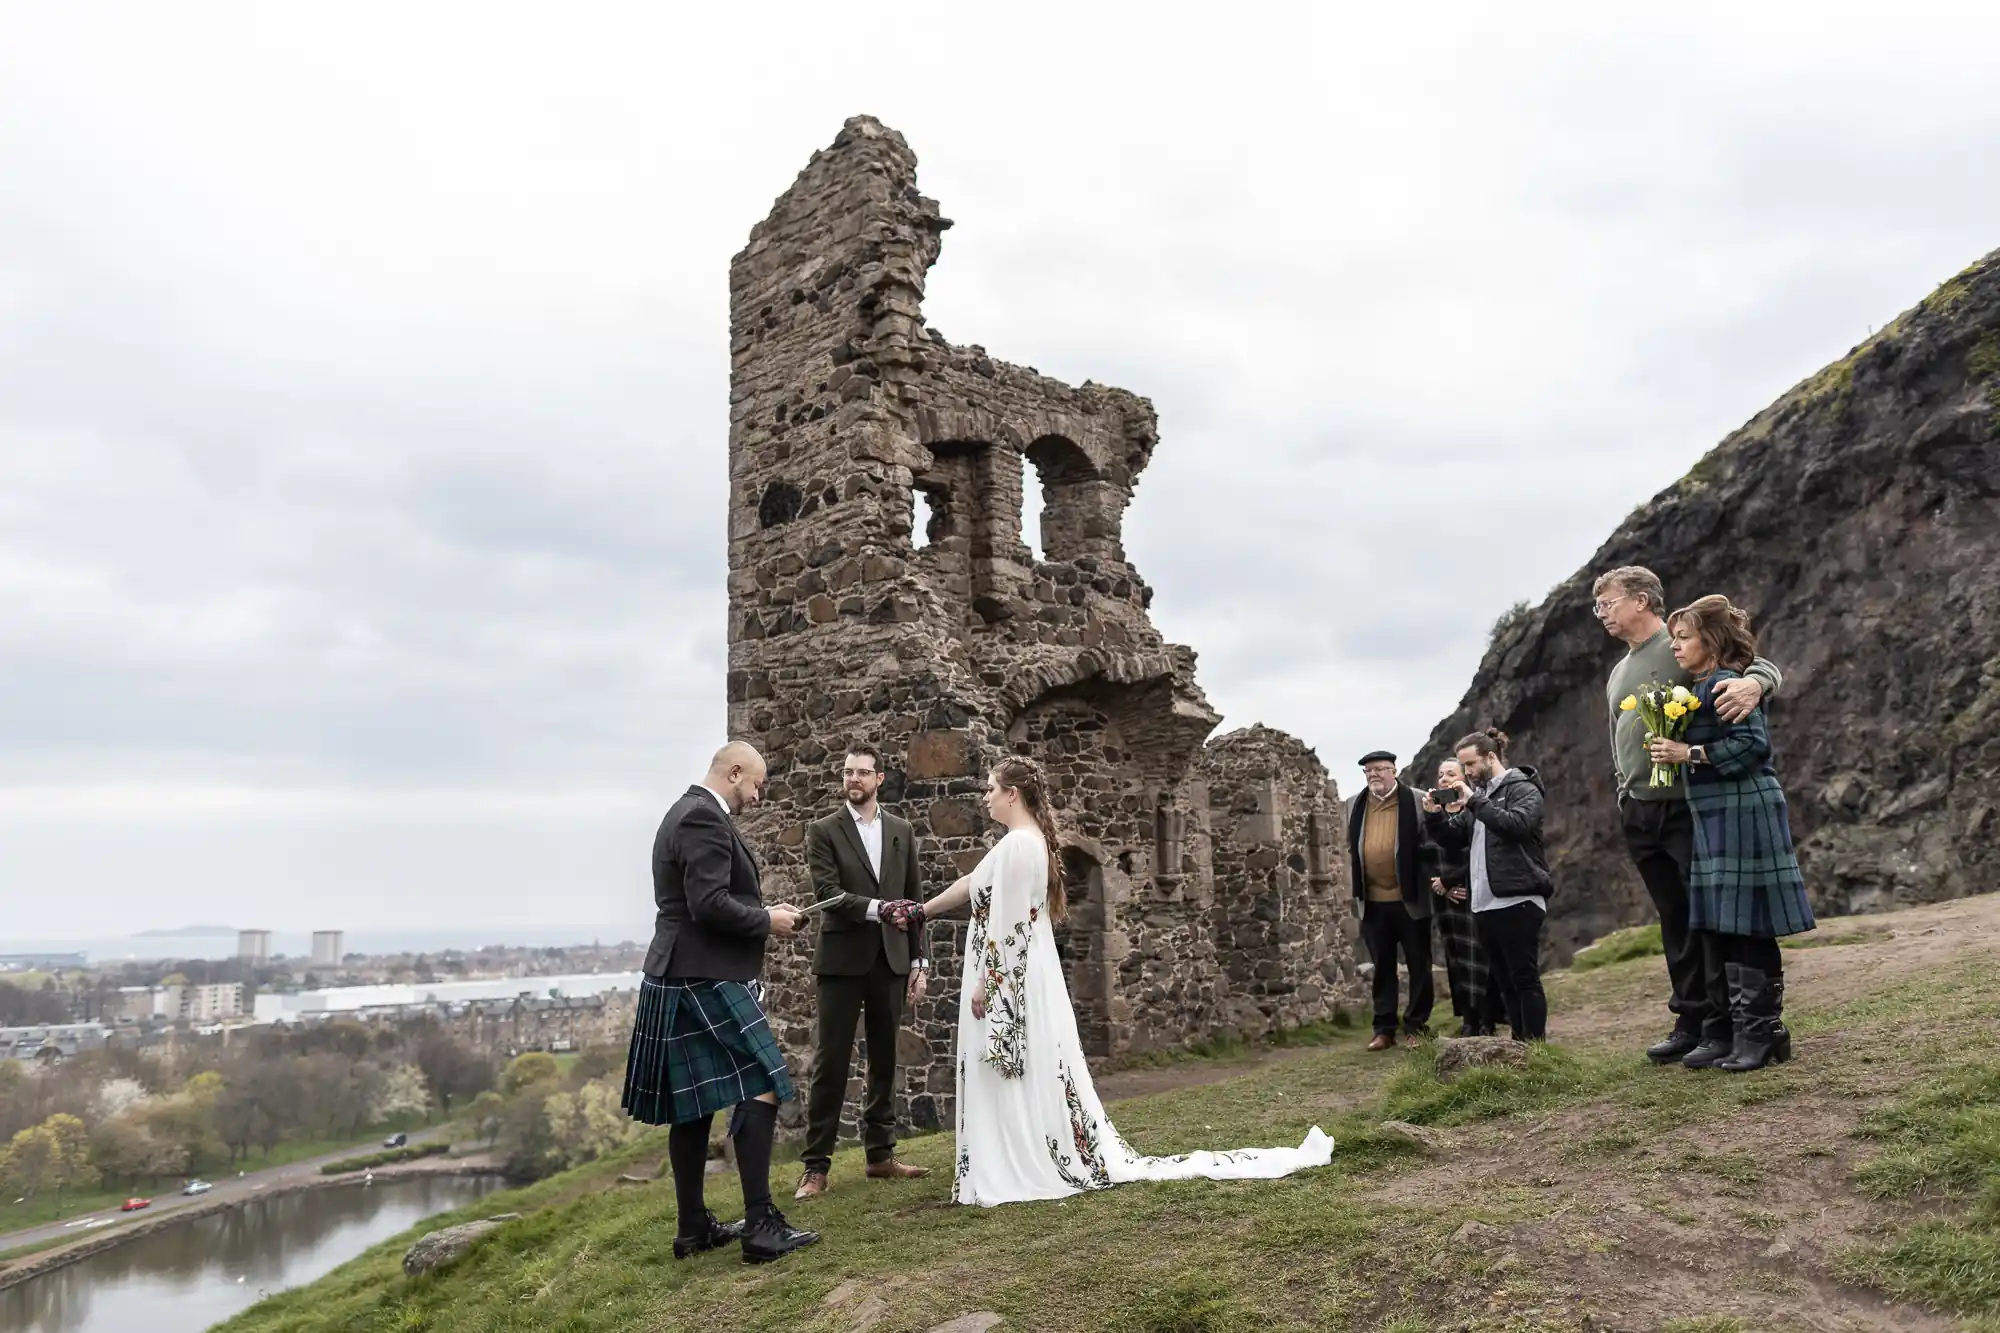 tying the knot with ruin backdrop